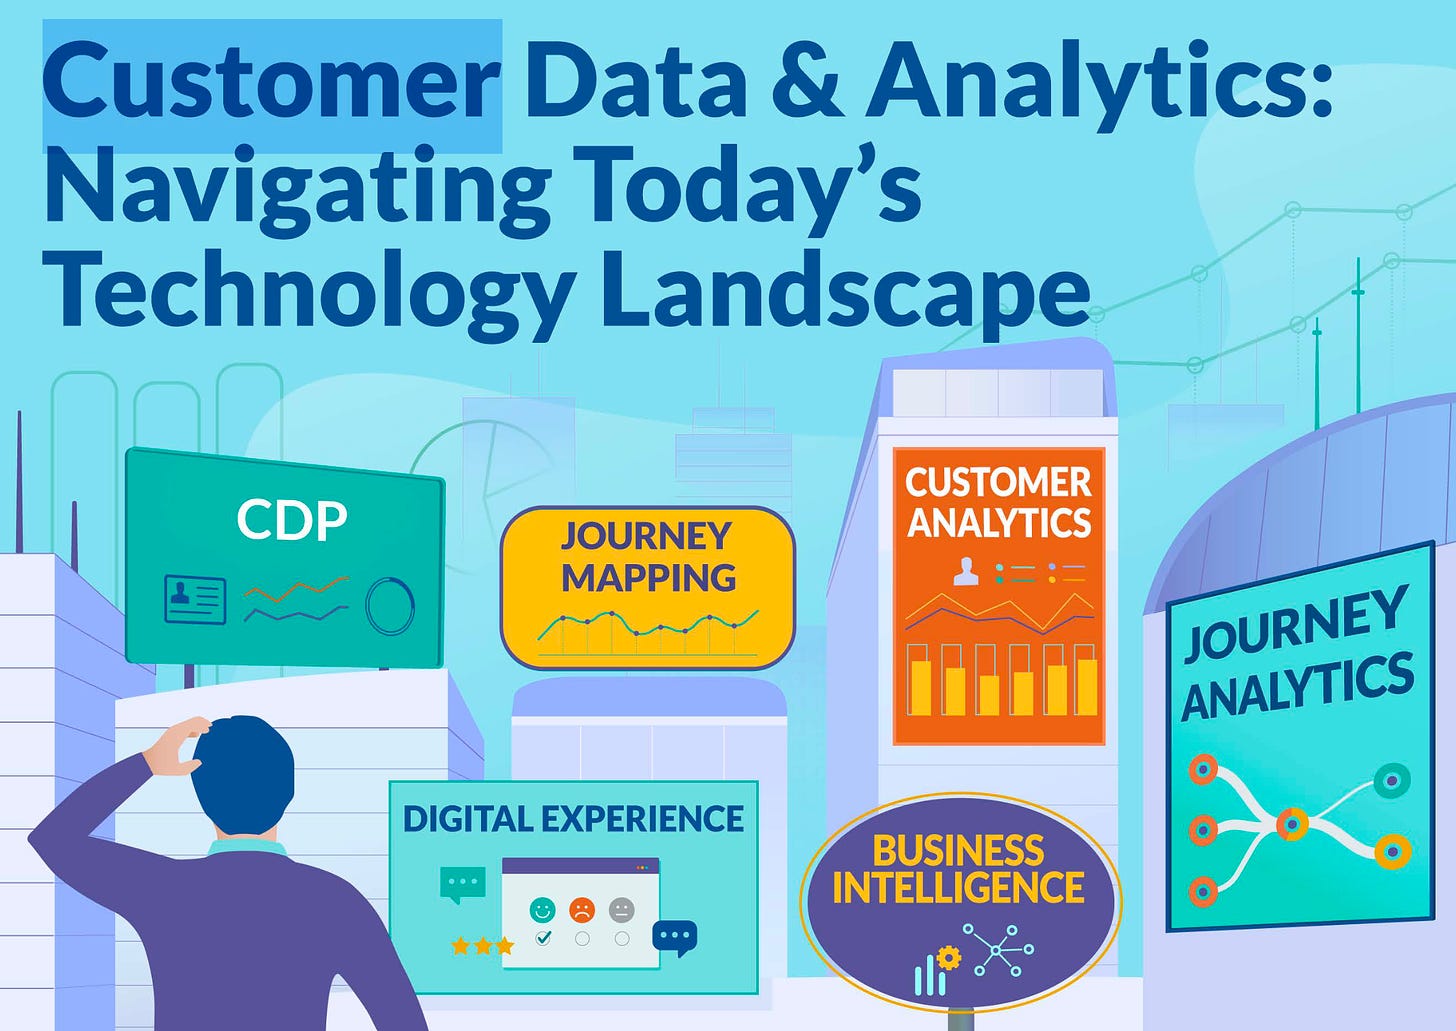 Perspective from Pointillist on customer data and analytics